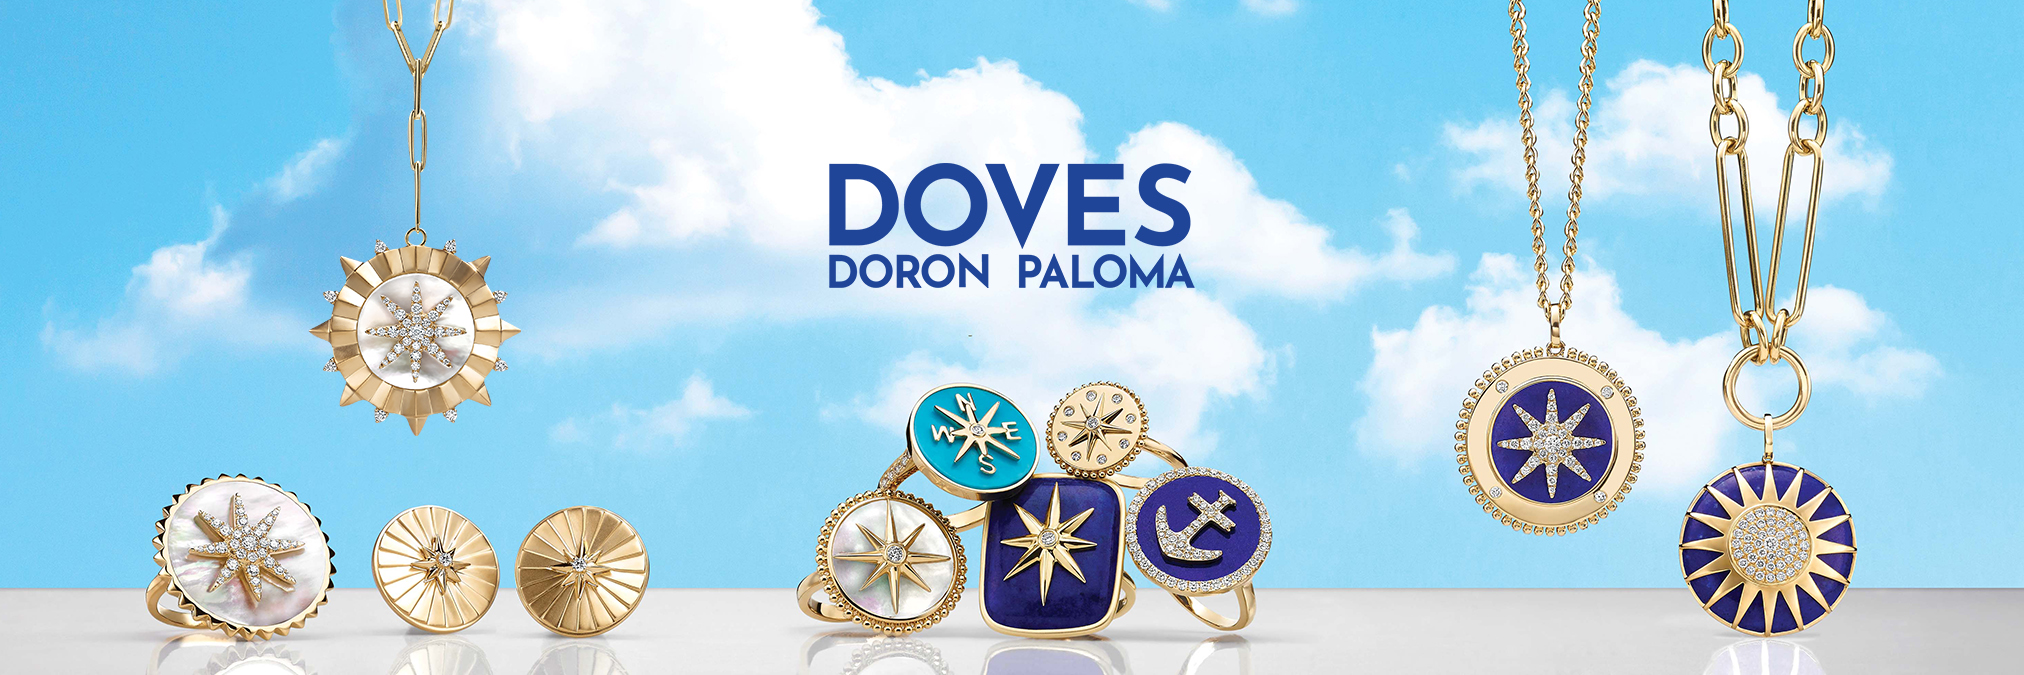 Hale's Jewelers Doves by Doron Paloma